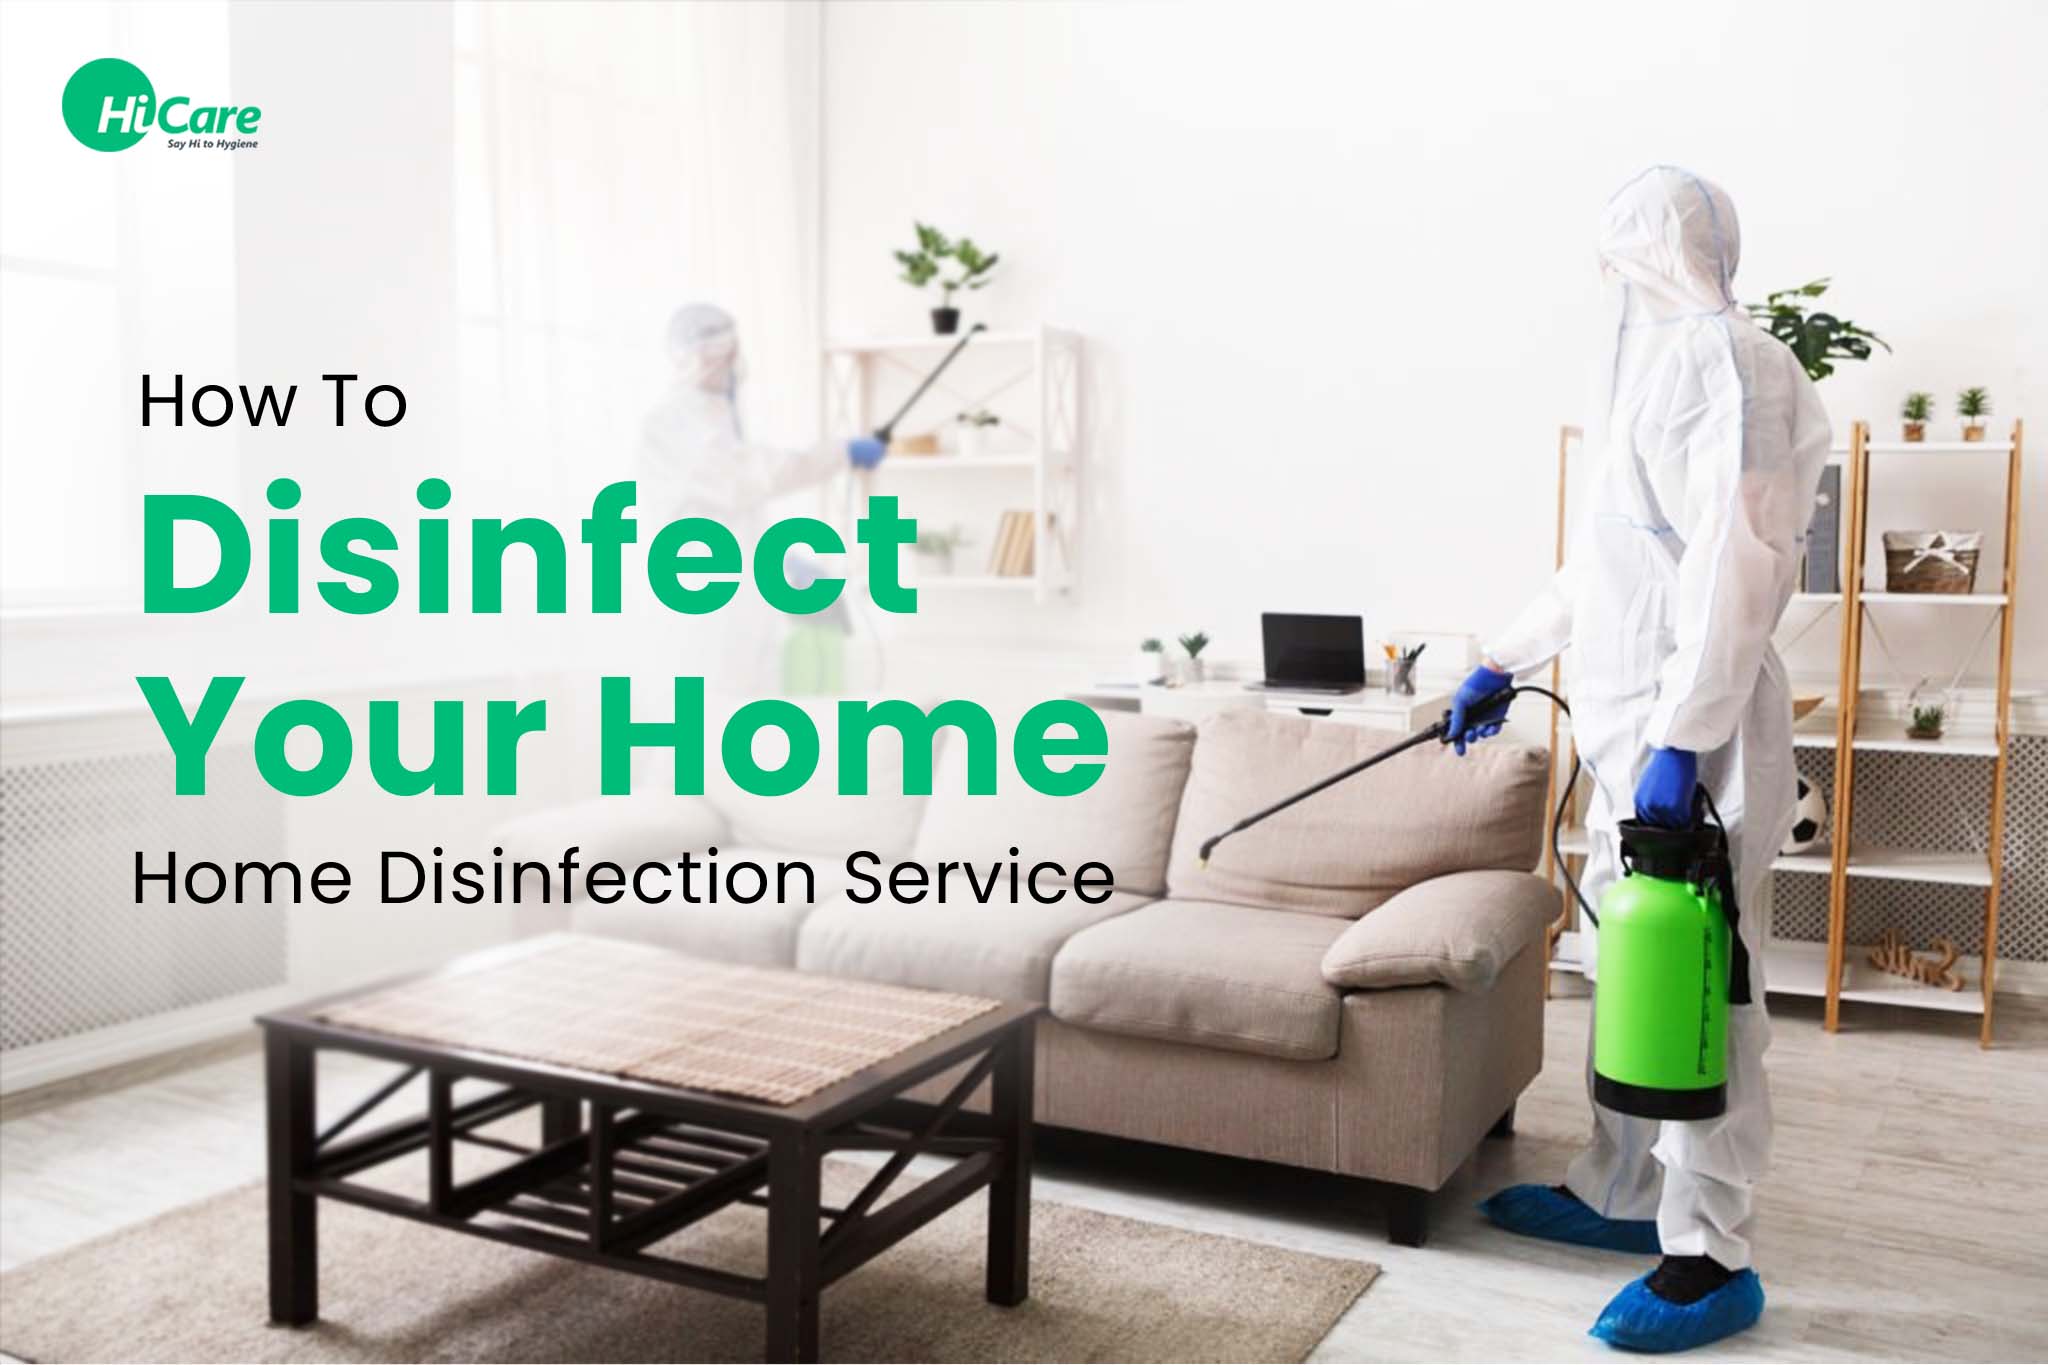 How To Disinfect Your Home | Home Disinfection Service – HiCare